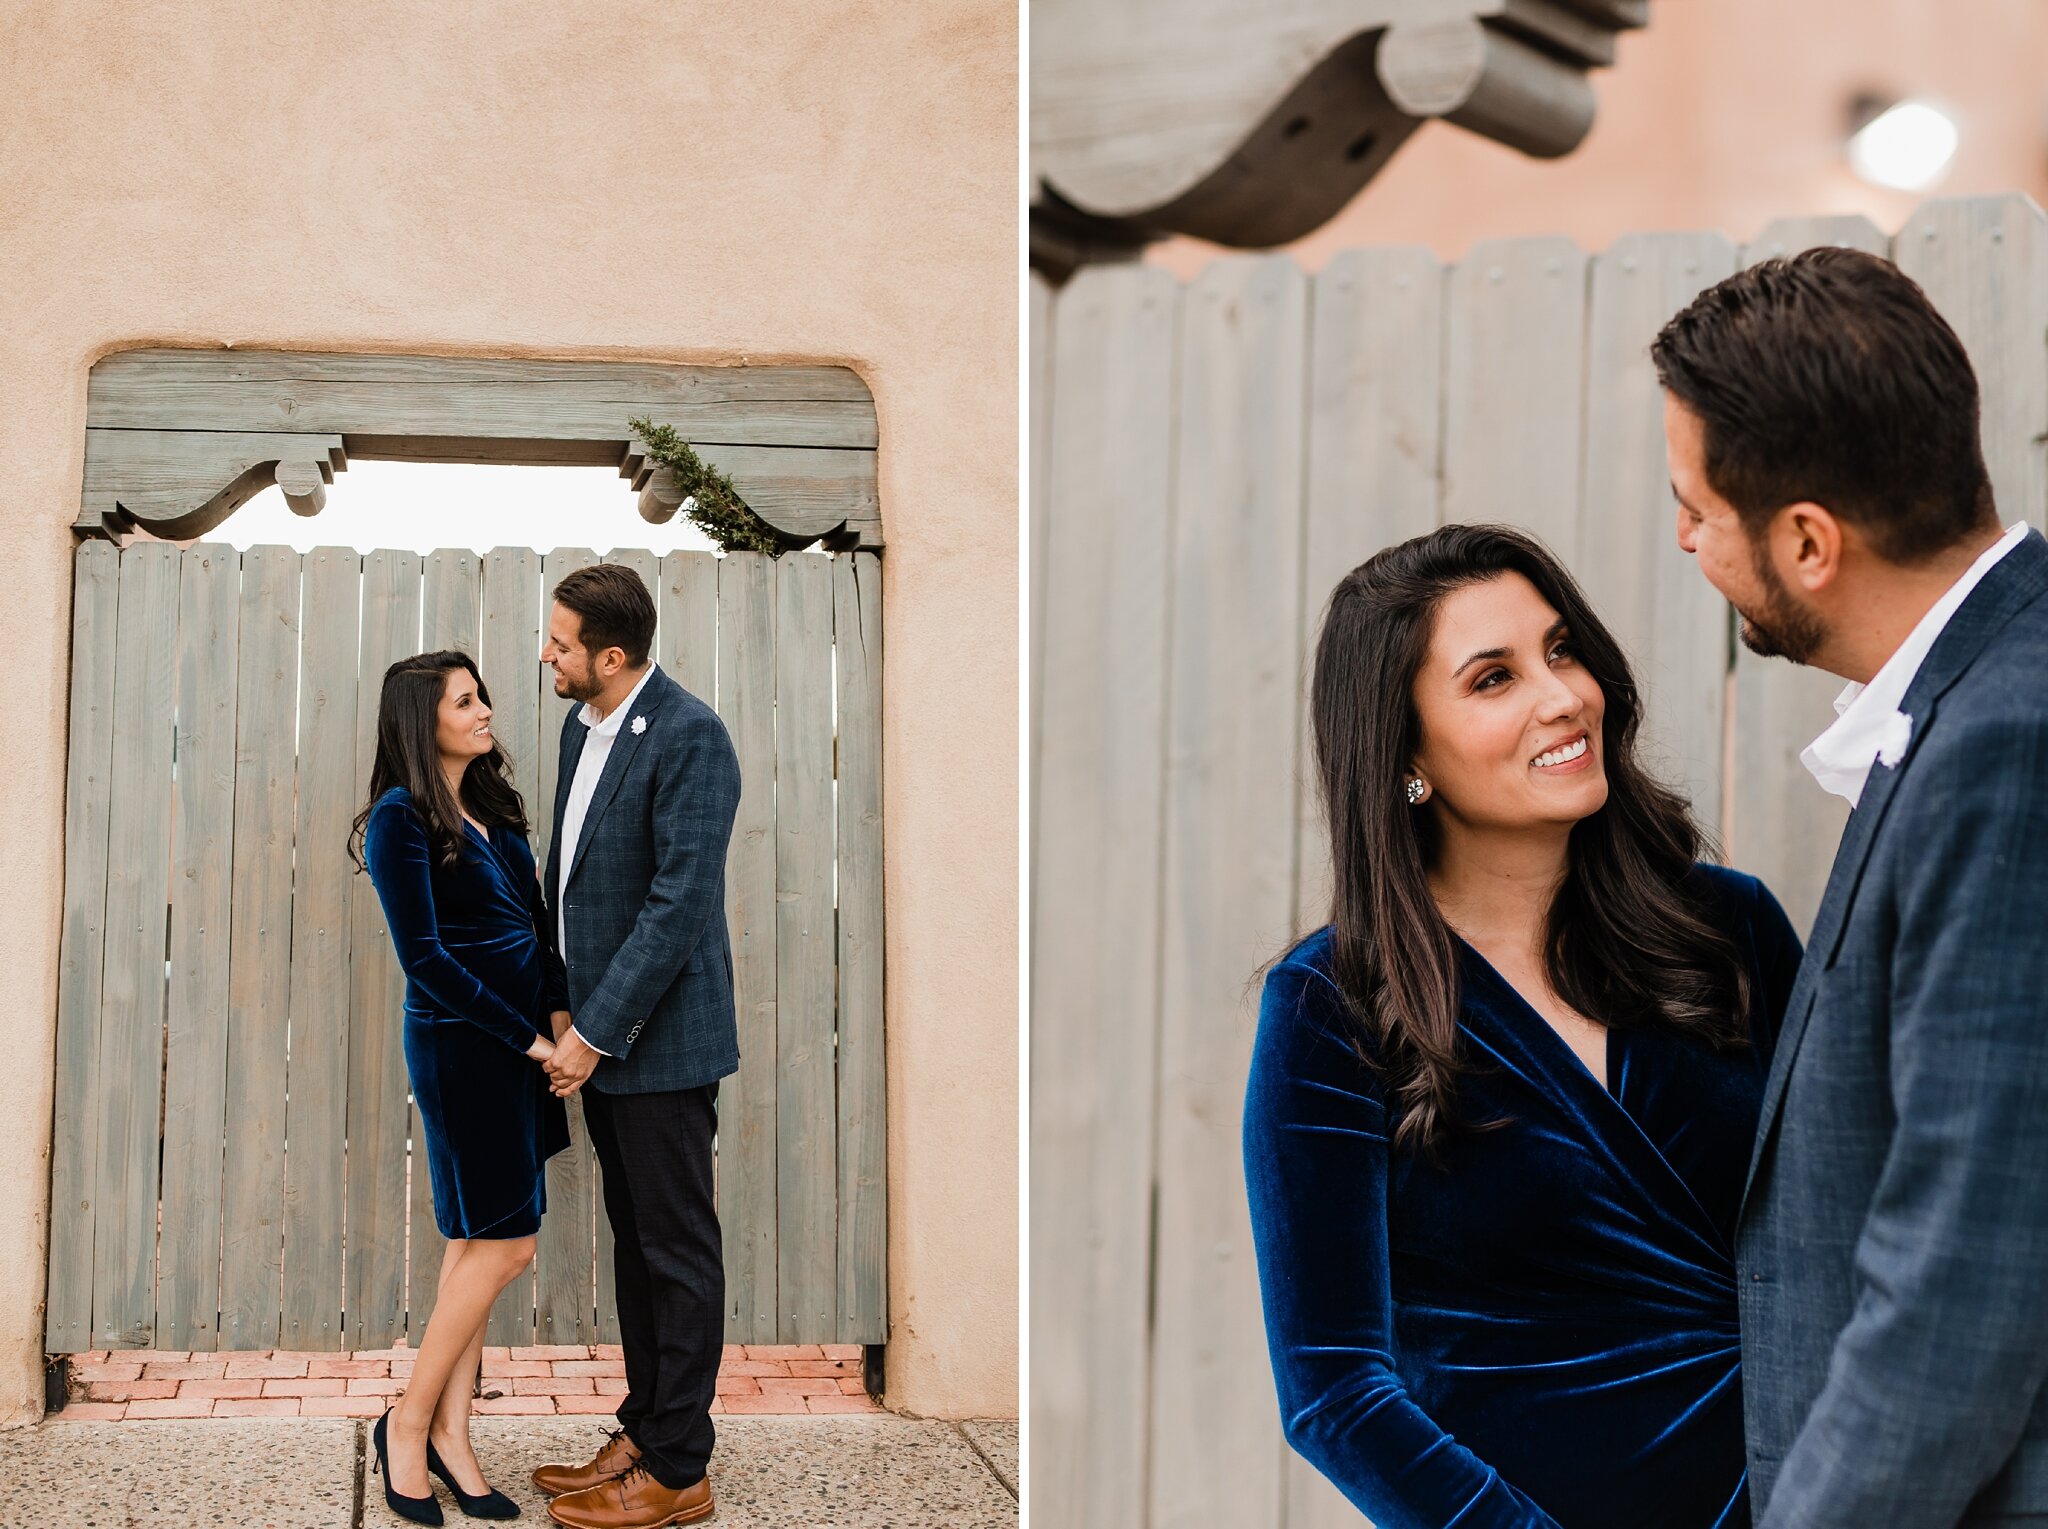 Alicia+lucia+photography+-+albuquerque+wedding+photographer+-+santa+fe+wedding+photography+-+new+mexico+wedding+photographer+-+new+mexico+wedding+-+albuquerque+engagement+-+old+town+engagement+-+christmas+engagement+-+holiday+engagement_0028.jpg